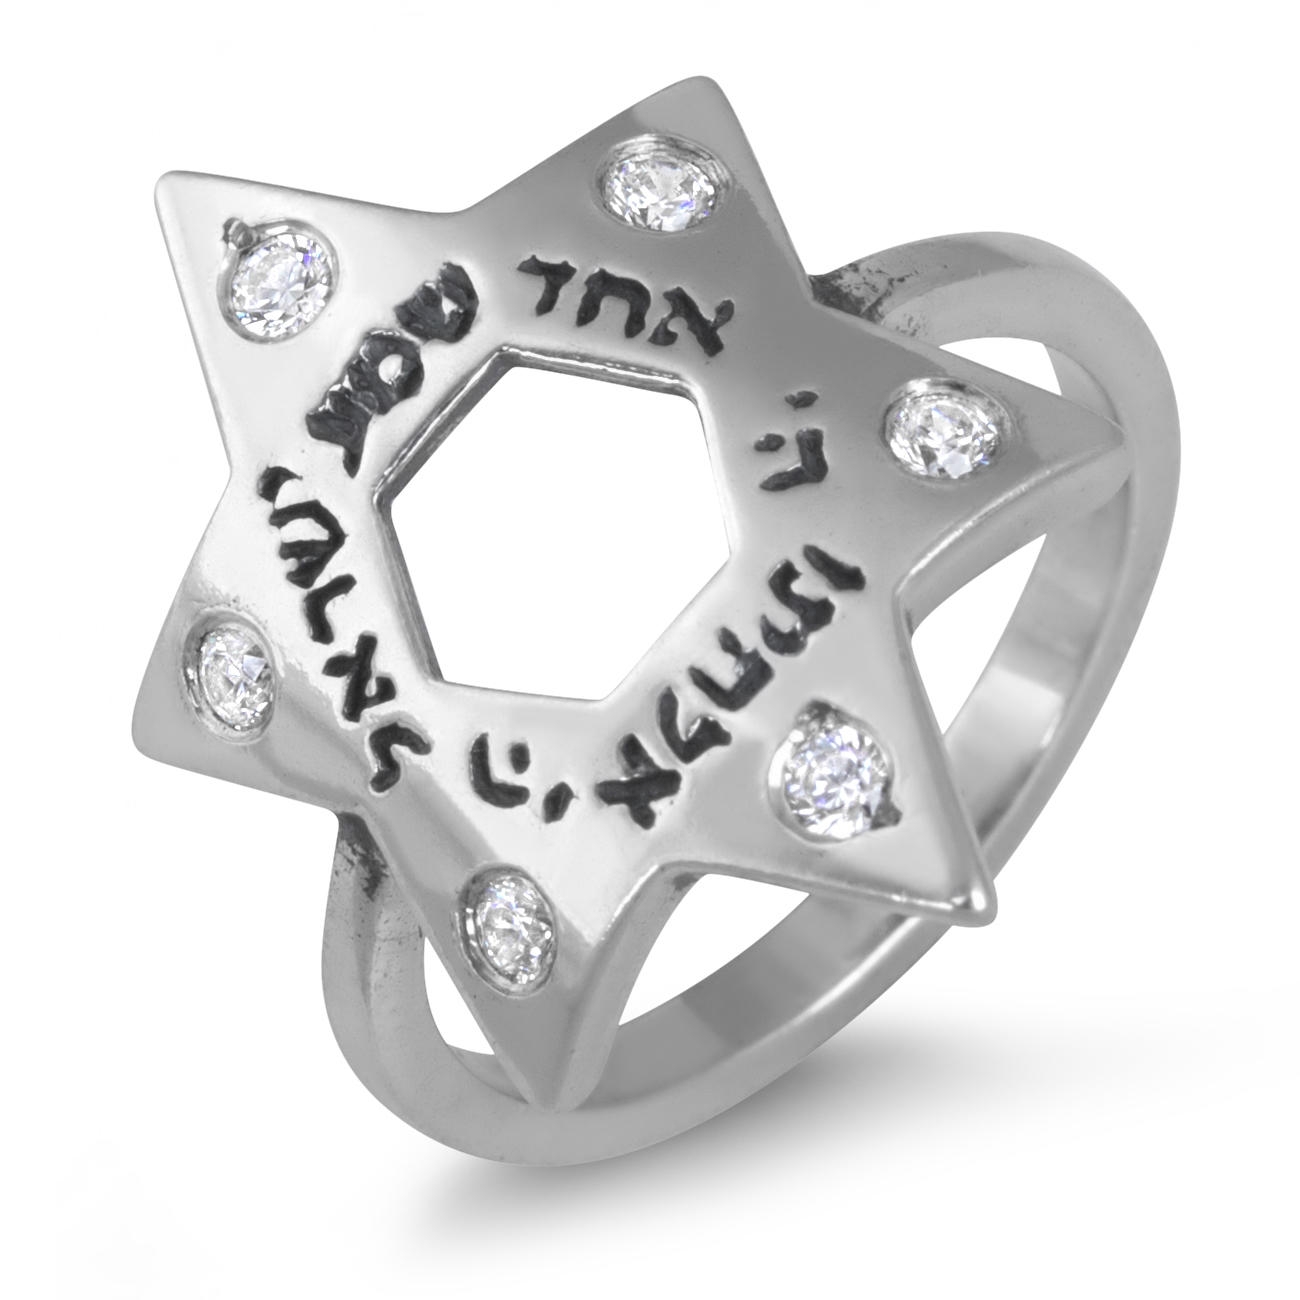 Sterling Silver Elongated Star of David Shema Ring with Cubic Zirconias - 1